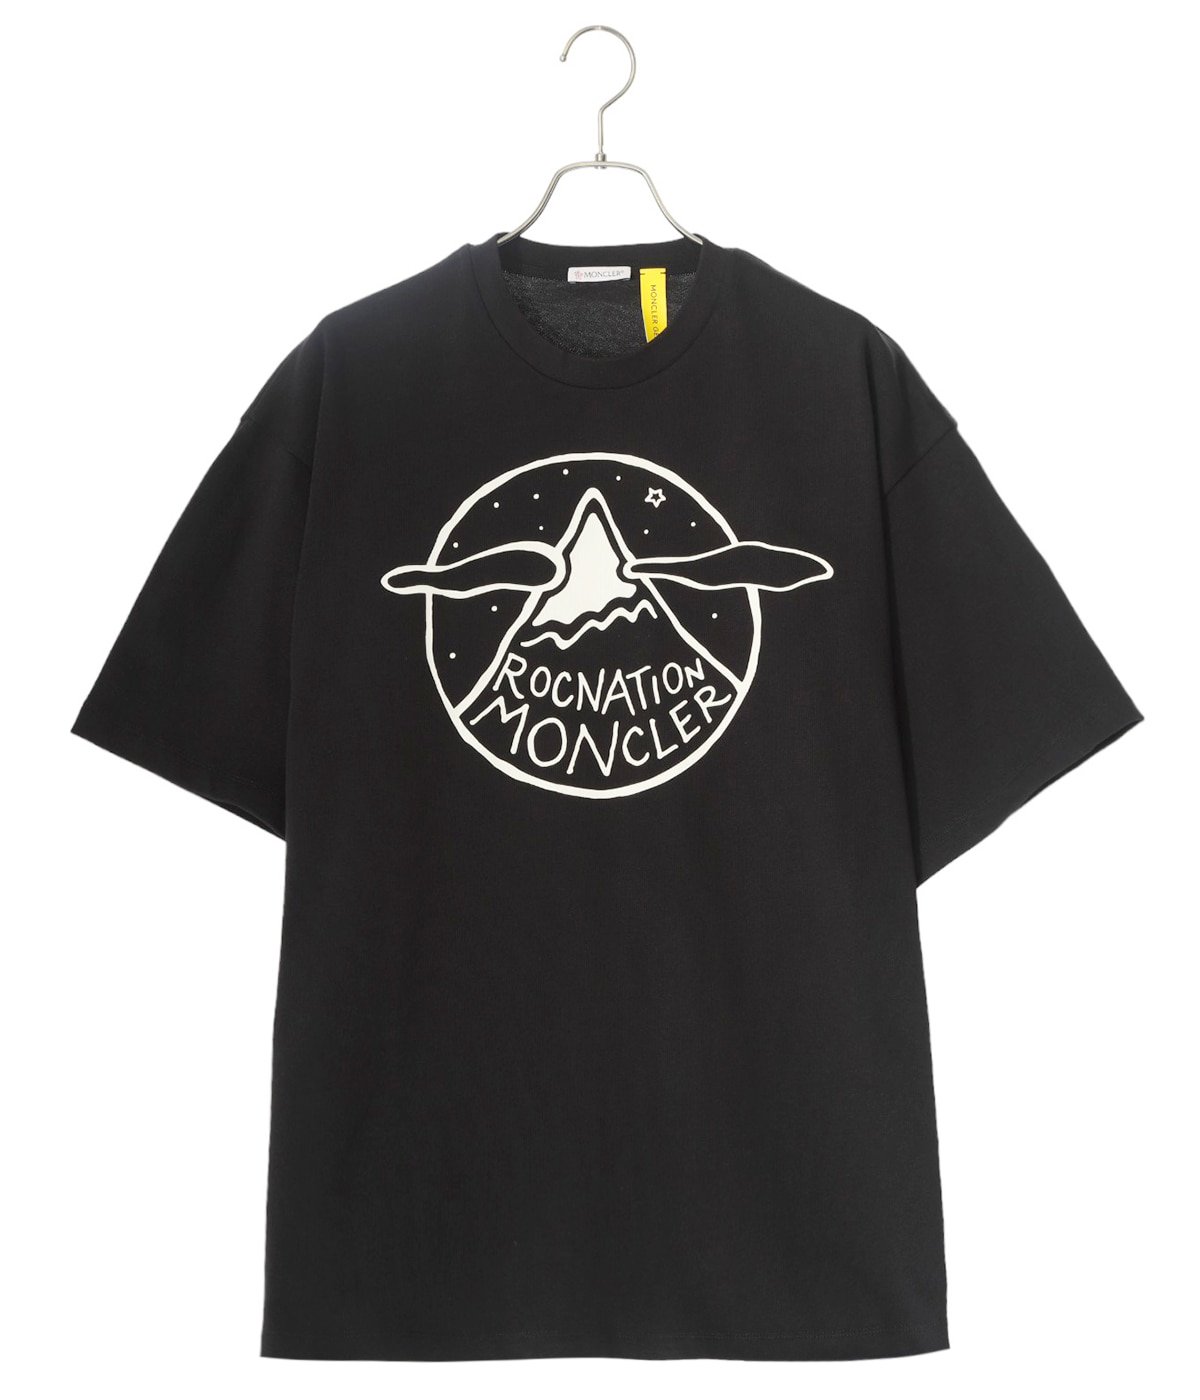 SS T-SHIRT | MONCLER X ROC NATION DESIGNED BY JAY-Z(モンクレール X 